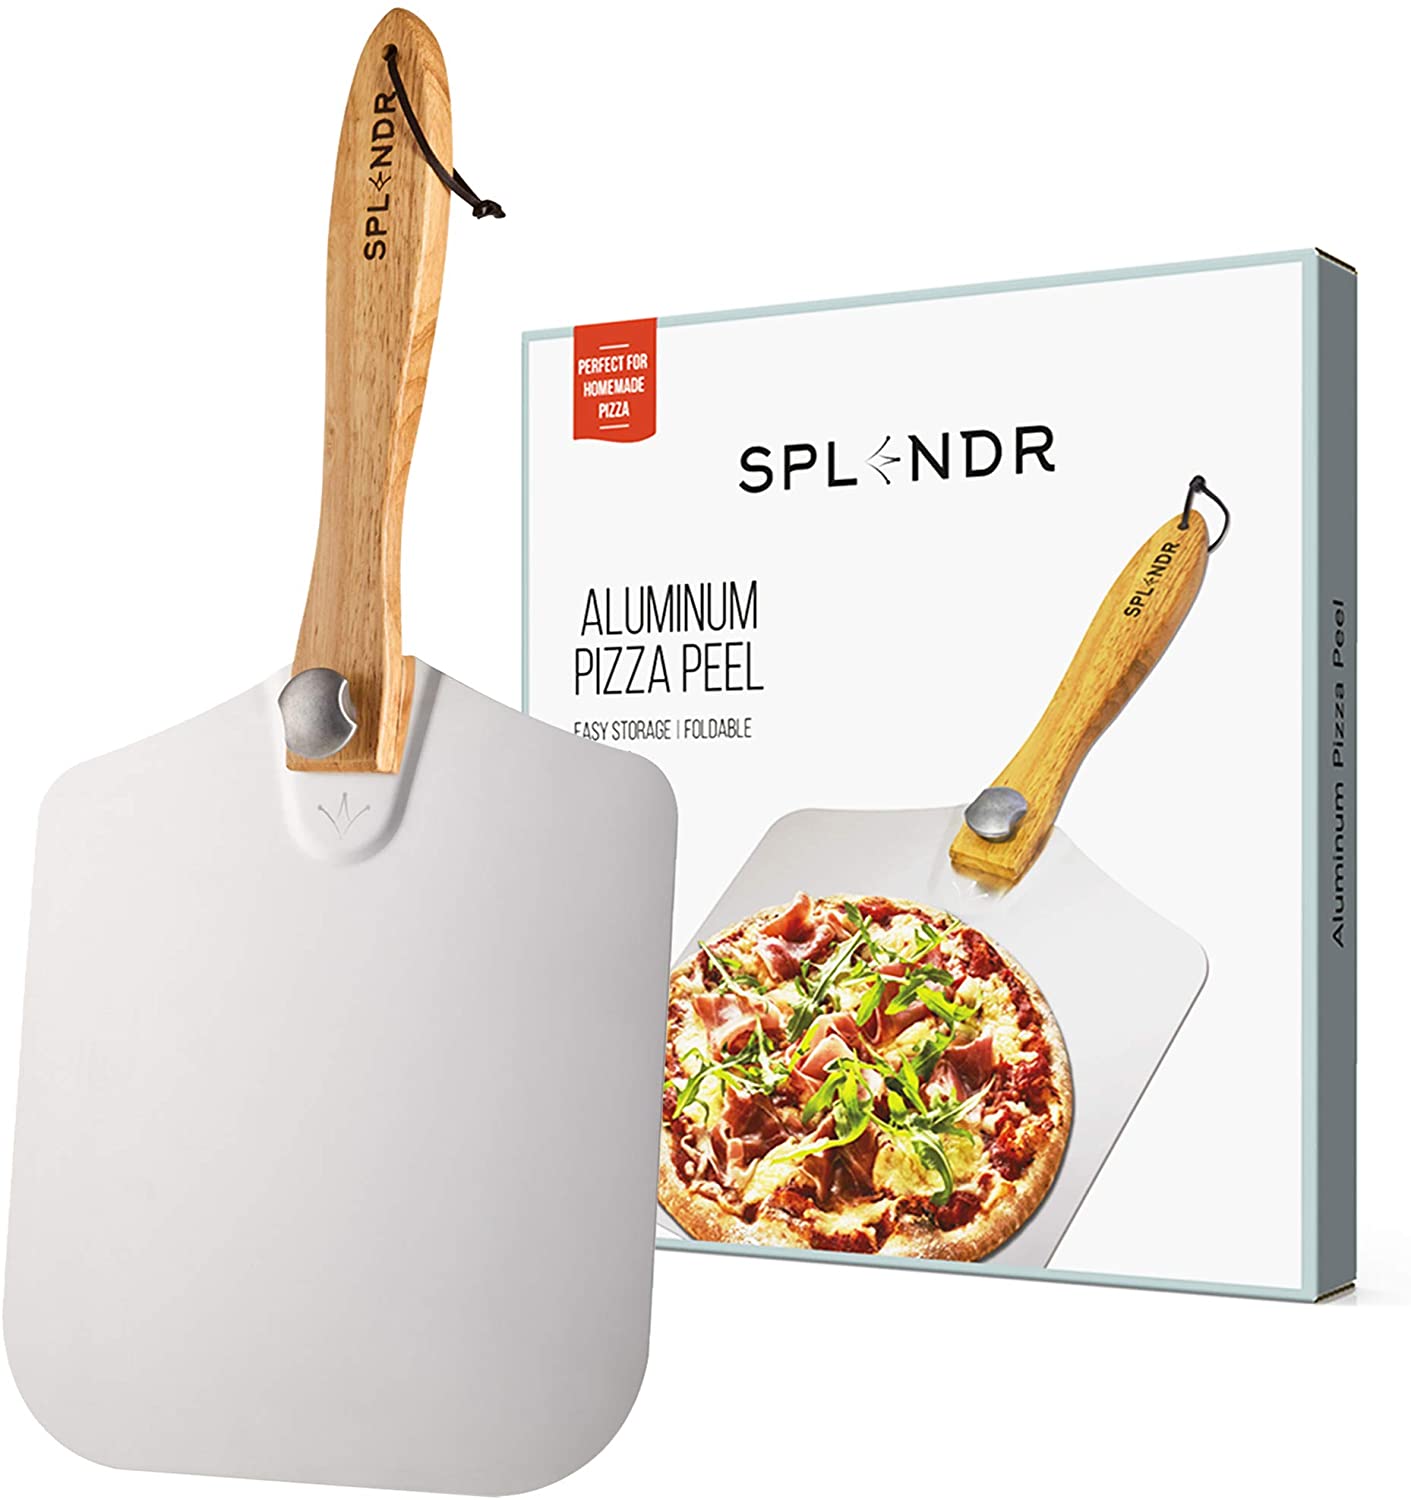 12 inch Metal Pizza Spatula for Baking Homemade Pizza and Bread on Oven and Grill Rokiya Aluminum Pizza Peel wiht Foldable Wood Handle